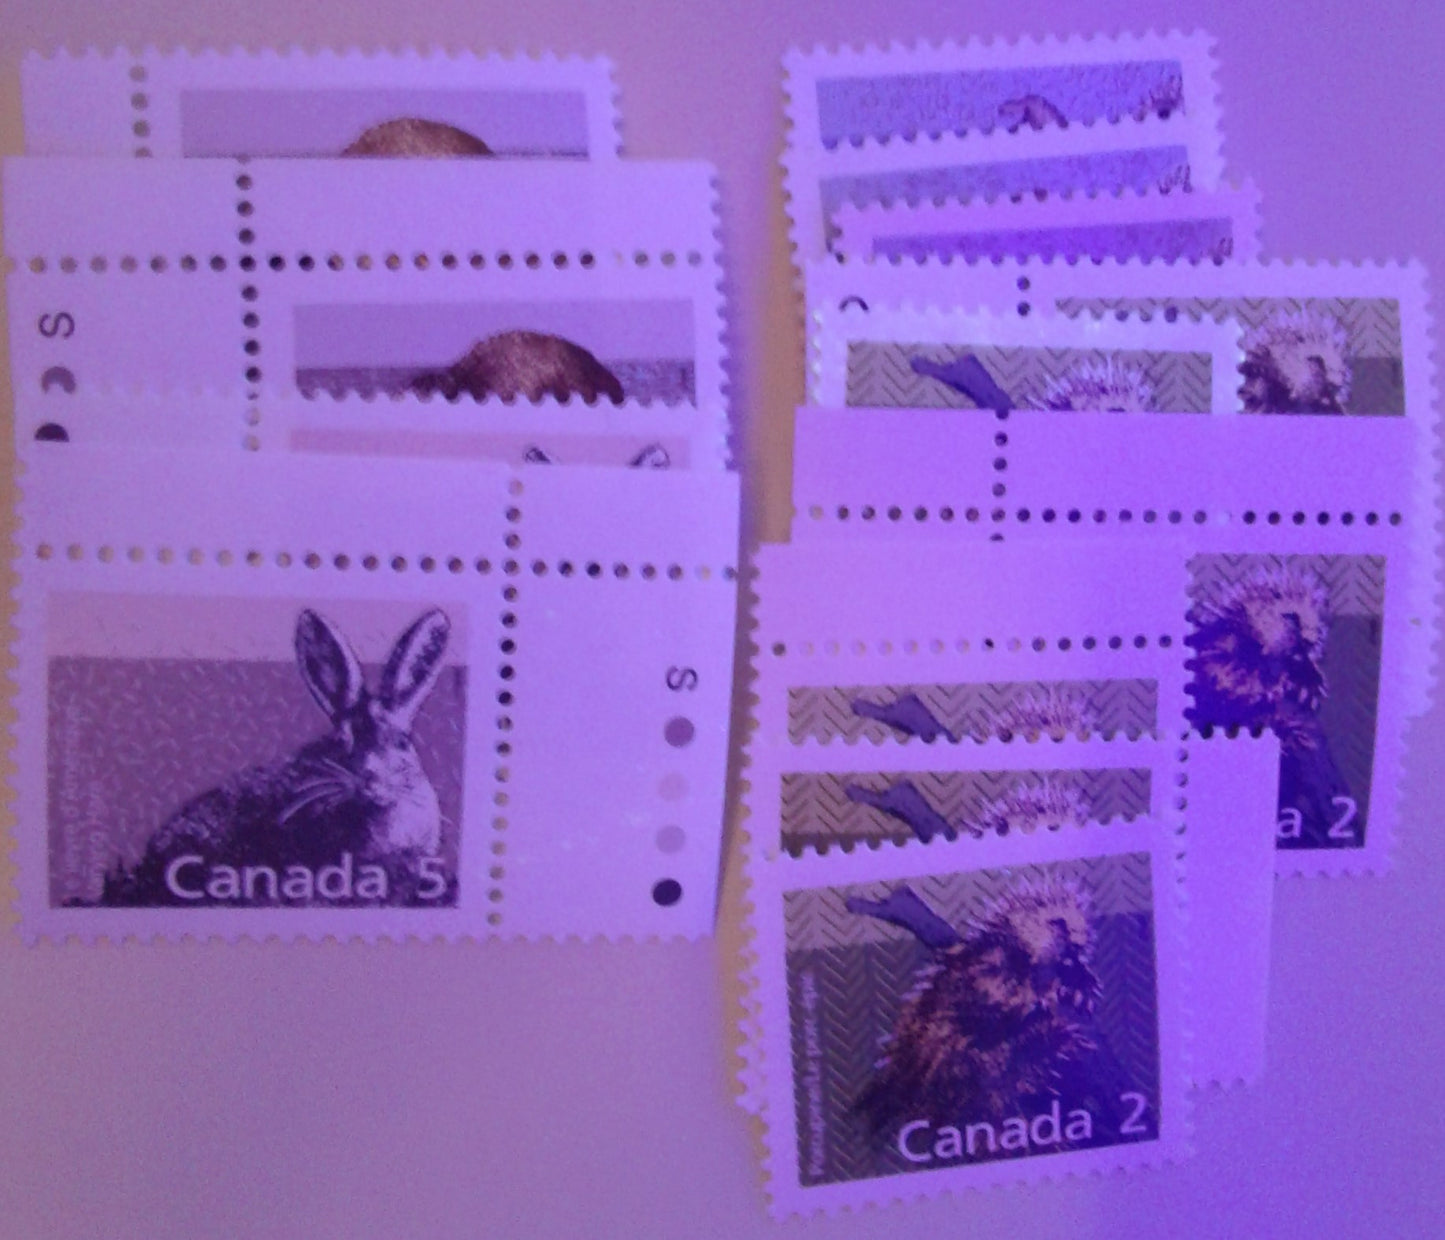 Canada #1180c 80c Peary Caribou 1988-1991 Wildlife and Architecture Issue, VFNH LR Inscription Block on DF/LF Peterborough Paper, Perf. 14.4 x 13.8